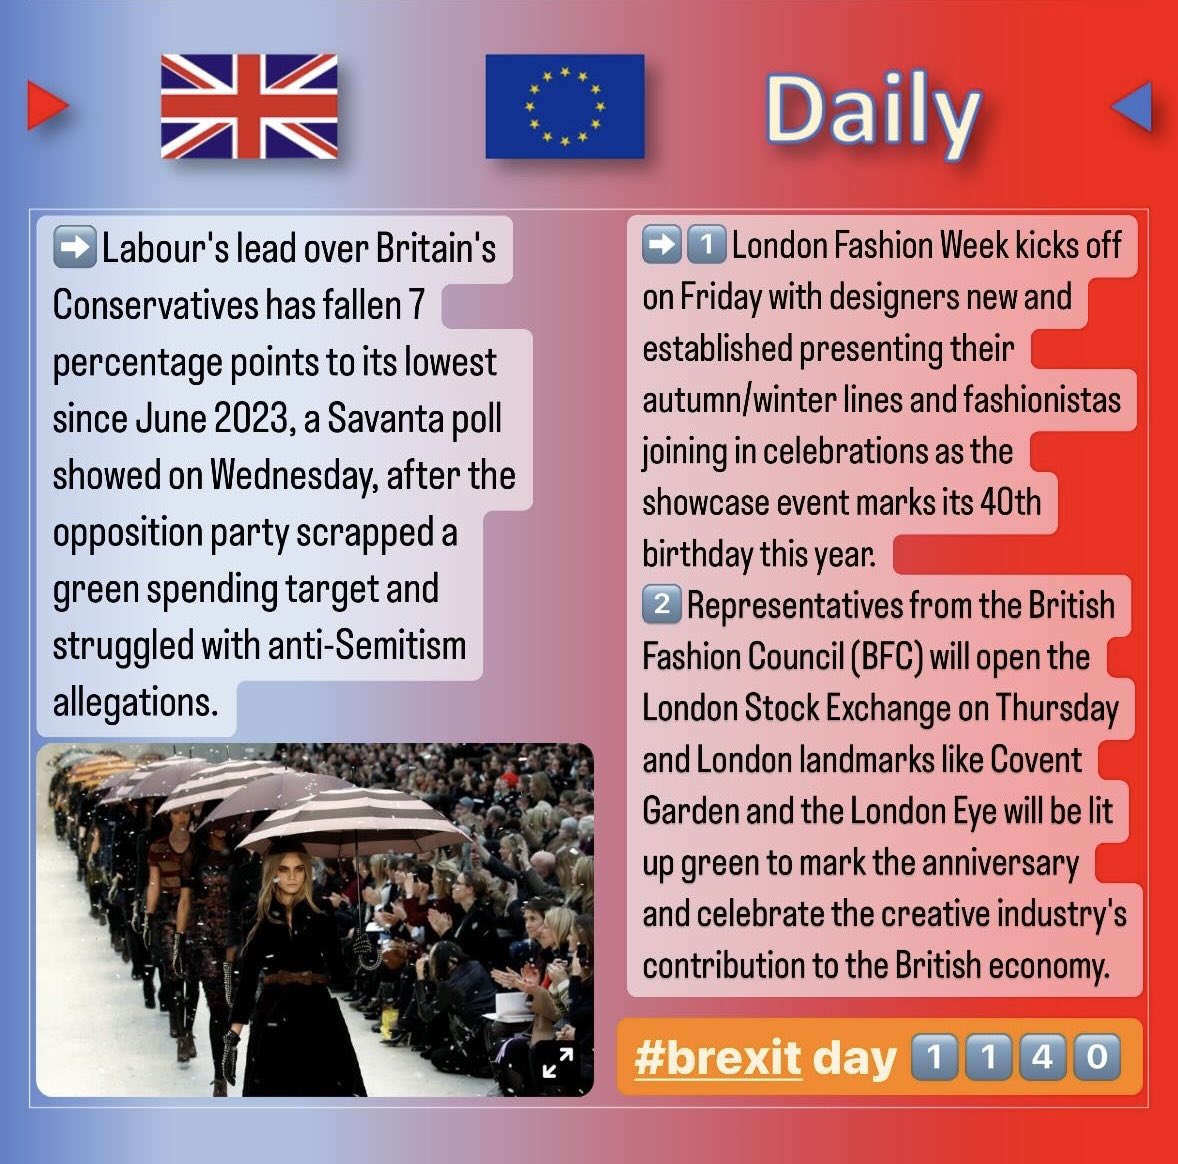 #Brexit daily #BrexitNews day 1️⃣1️⃣4️⃣0️⃣ #energytransition #trade #supplychain #business #logistics #Logistik #trade #export #import #customs #Finance #motionfinity #finances #financialservices #GDP #ukca #research #Science #space